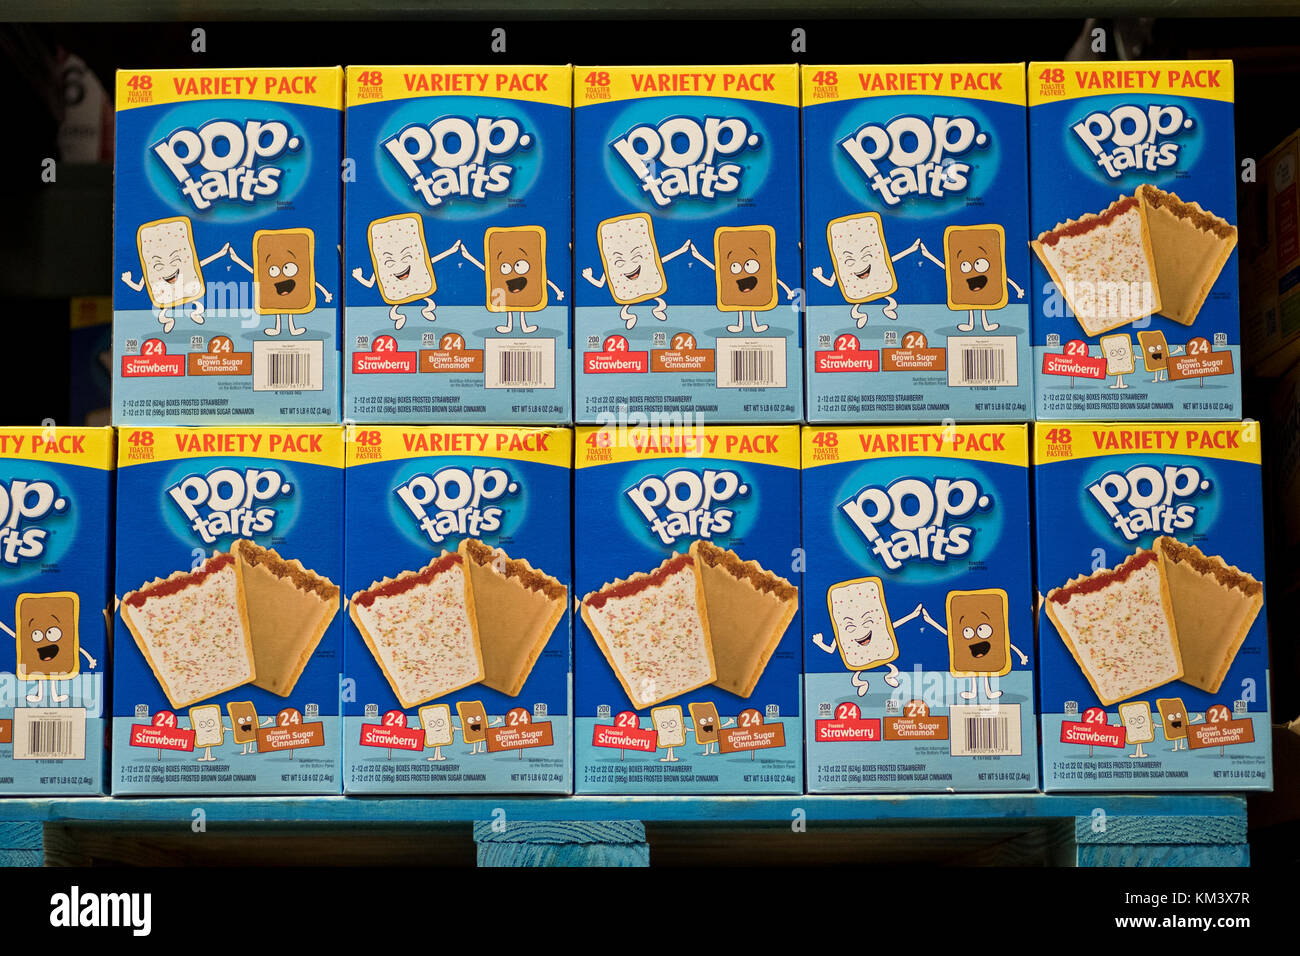 Large variety packages of Kellogg's Pop Tarts for sale at BJ's Wholesale Club in Whitestone, Queens, New York. Stock Photo